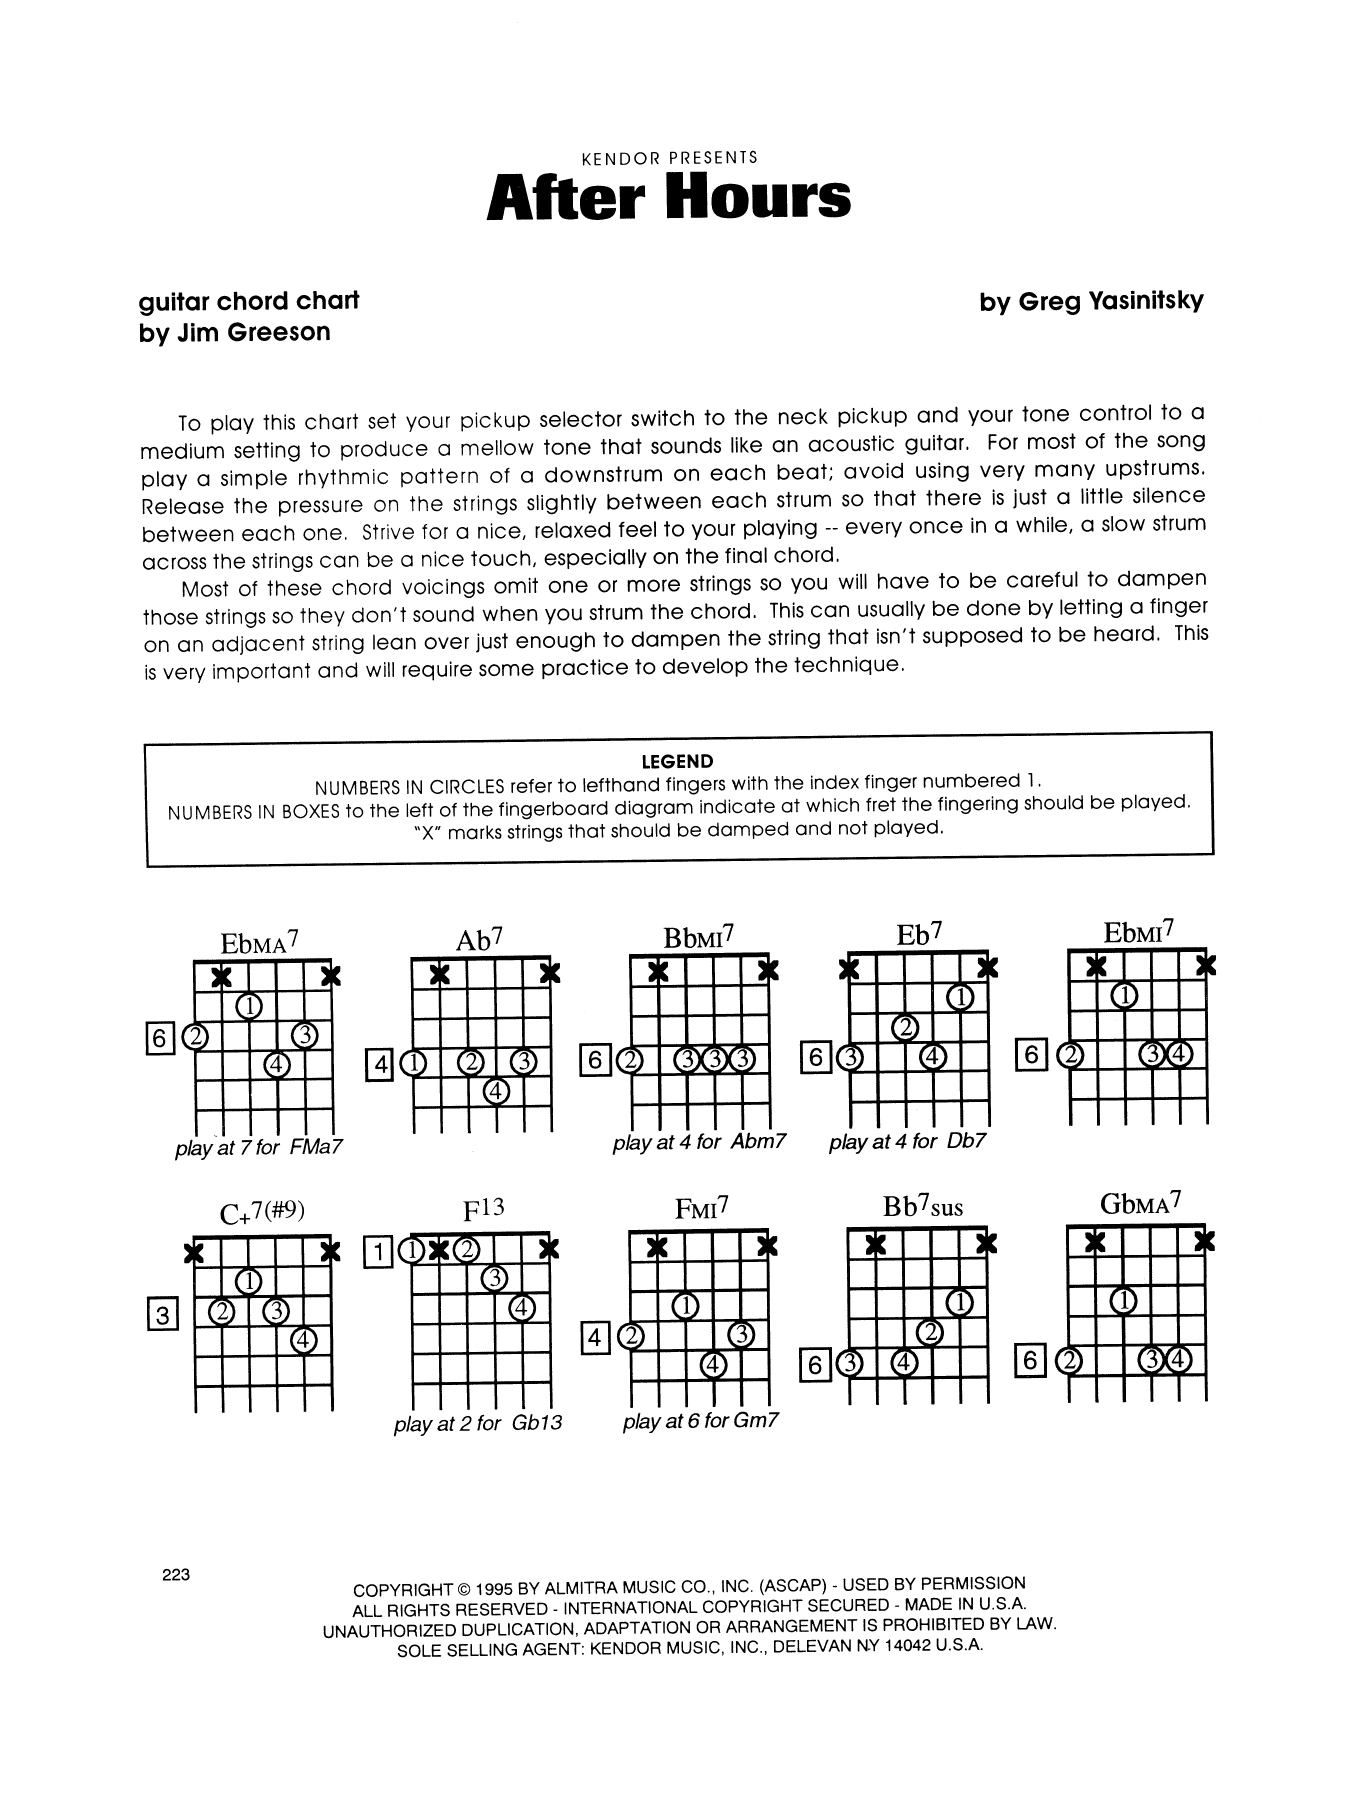 Download Gregory Yasinitsky After Hours - Guitar Chord Chart Sheet Music